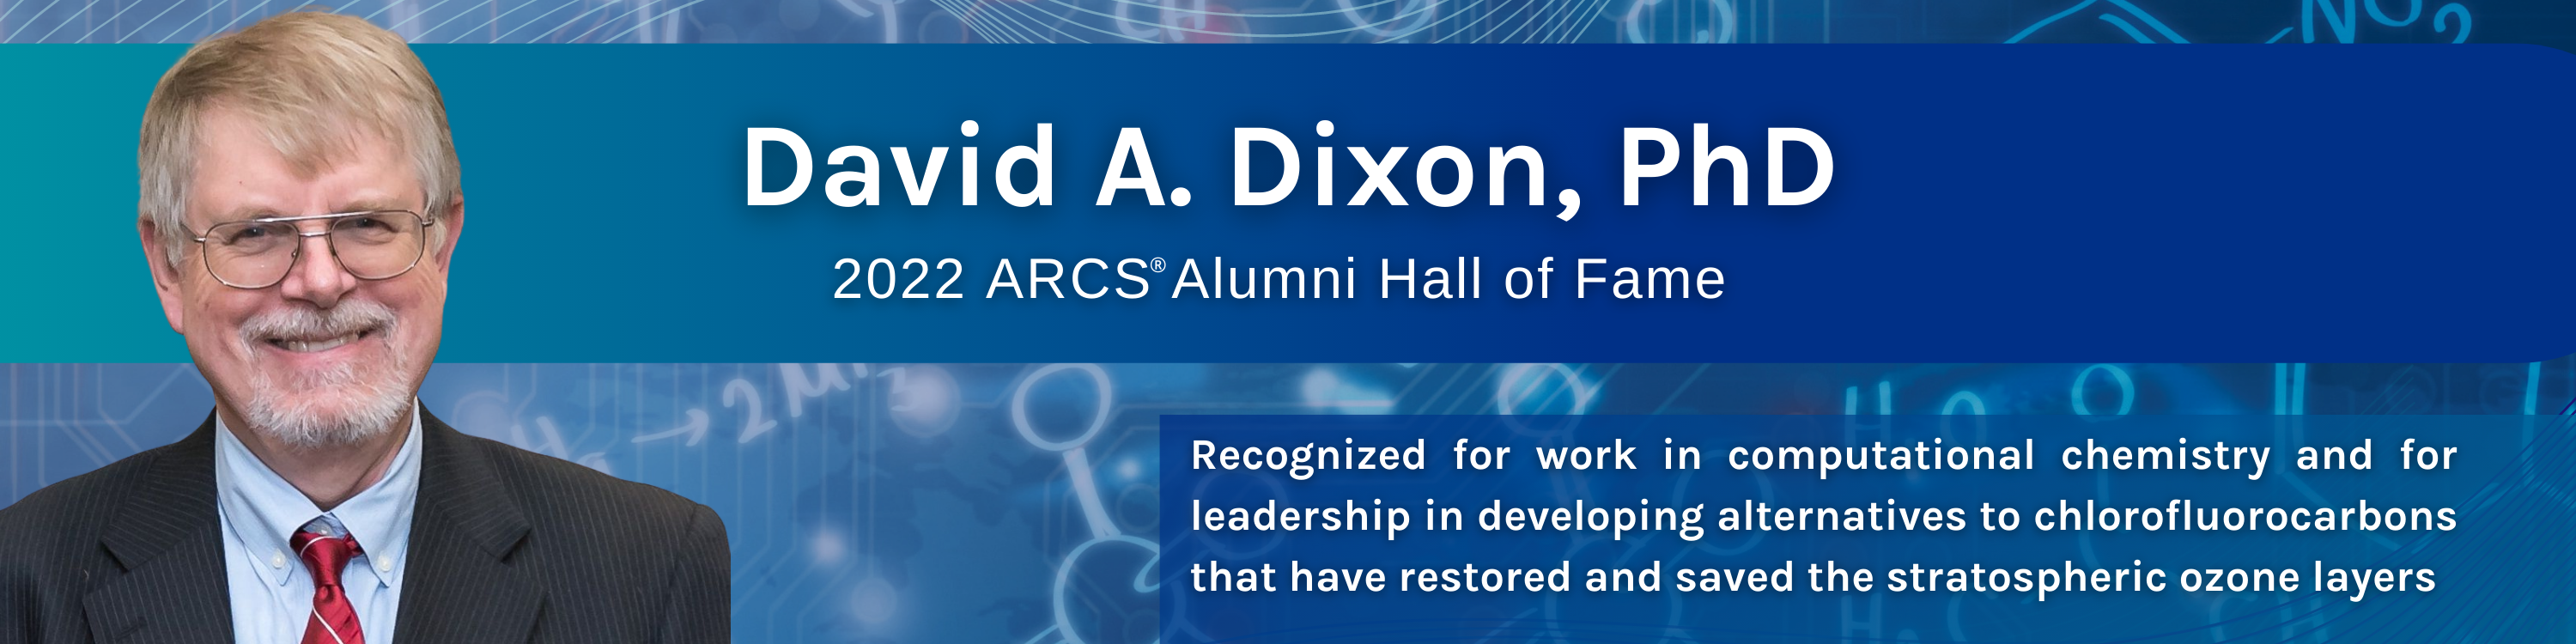 David Dixon, Phd, 2022 ARCS Alumni Hall of Fame - Recognized for work in computational chemistry and for leadership in developing alternatives for chlorofluorocarbons that have restored and saved the stratospheric ozone layers